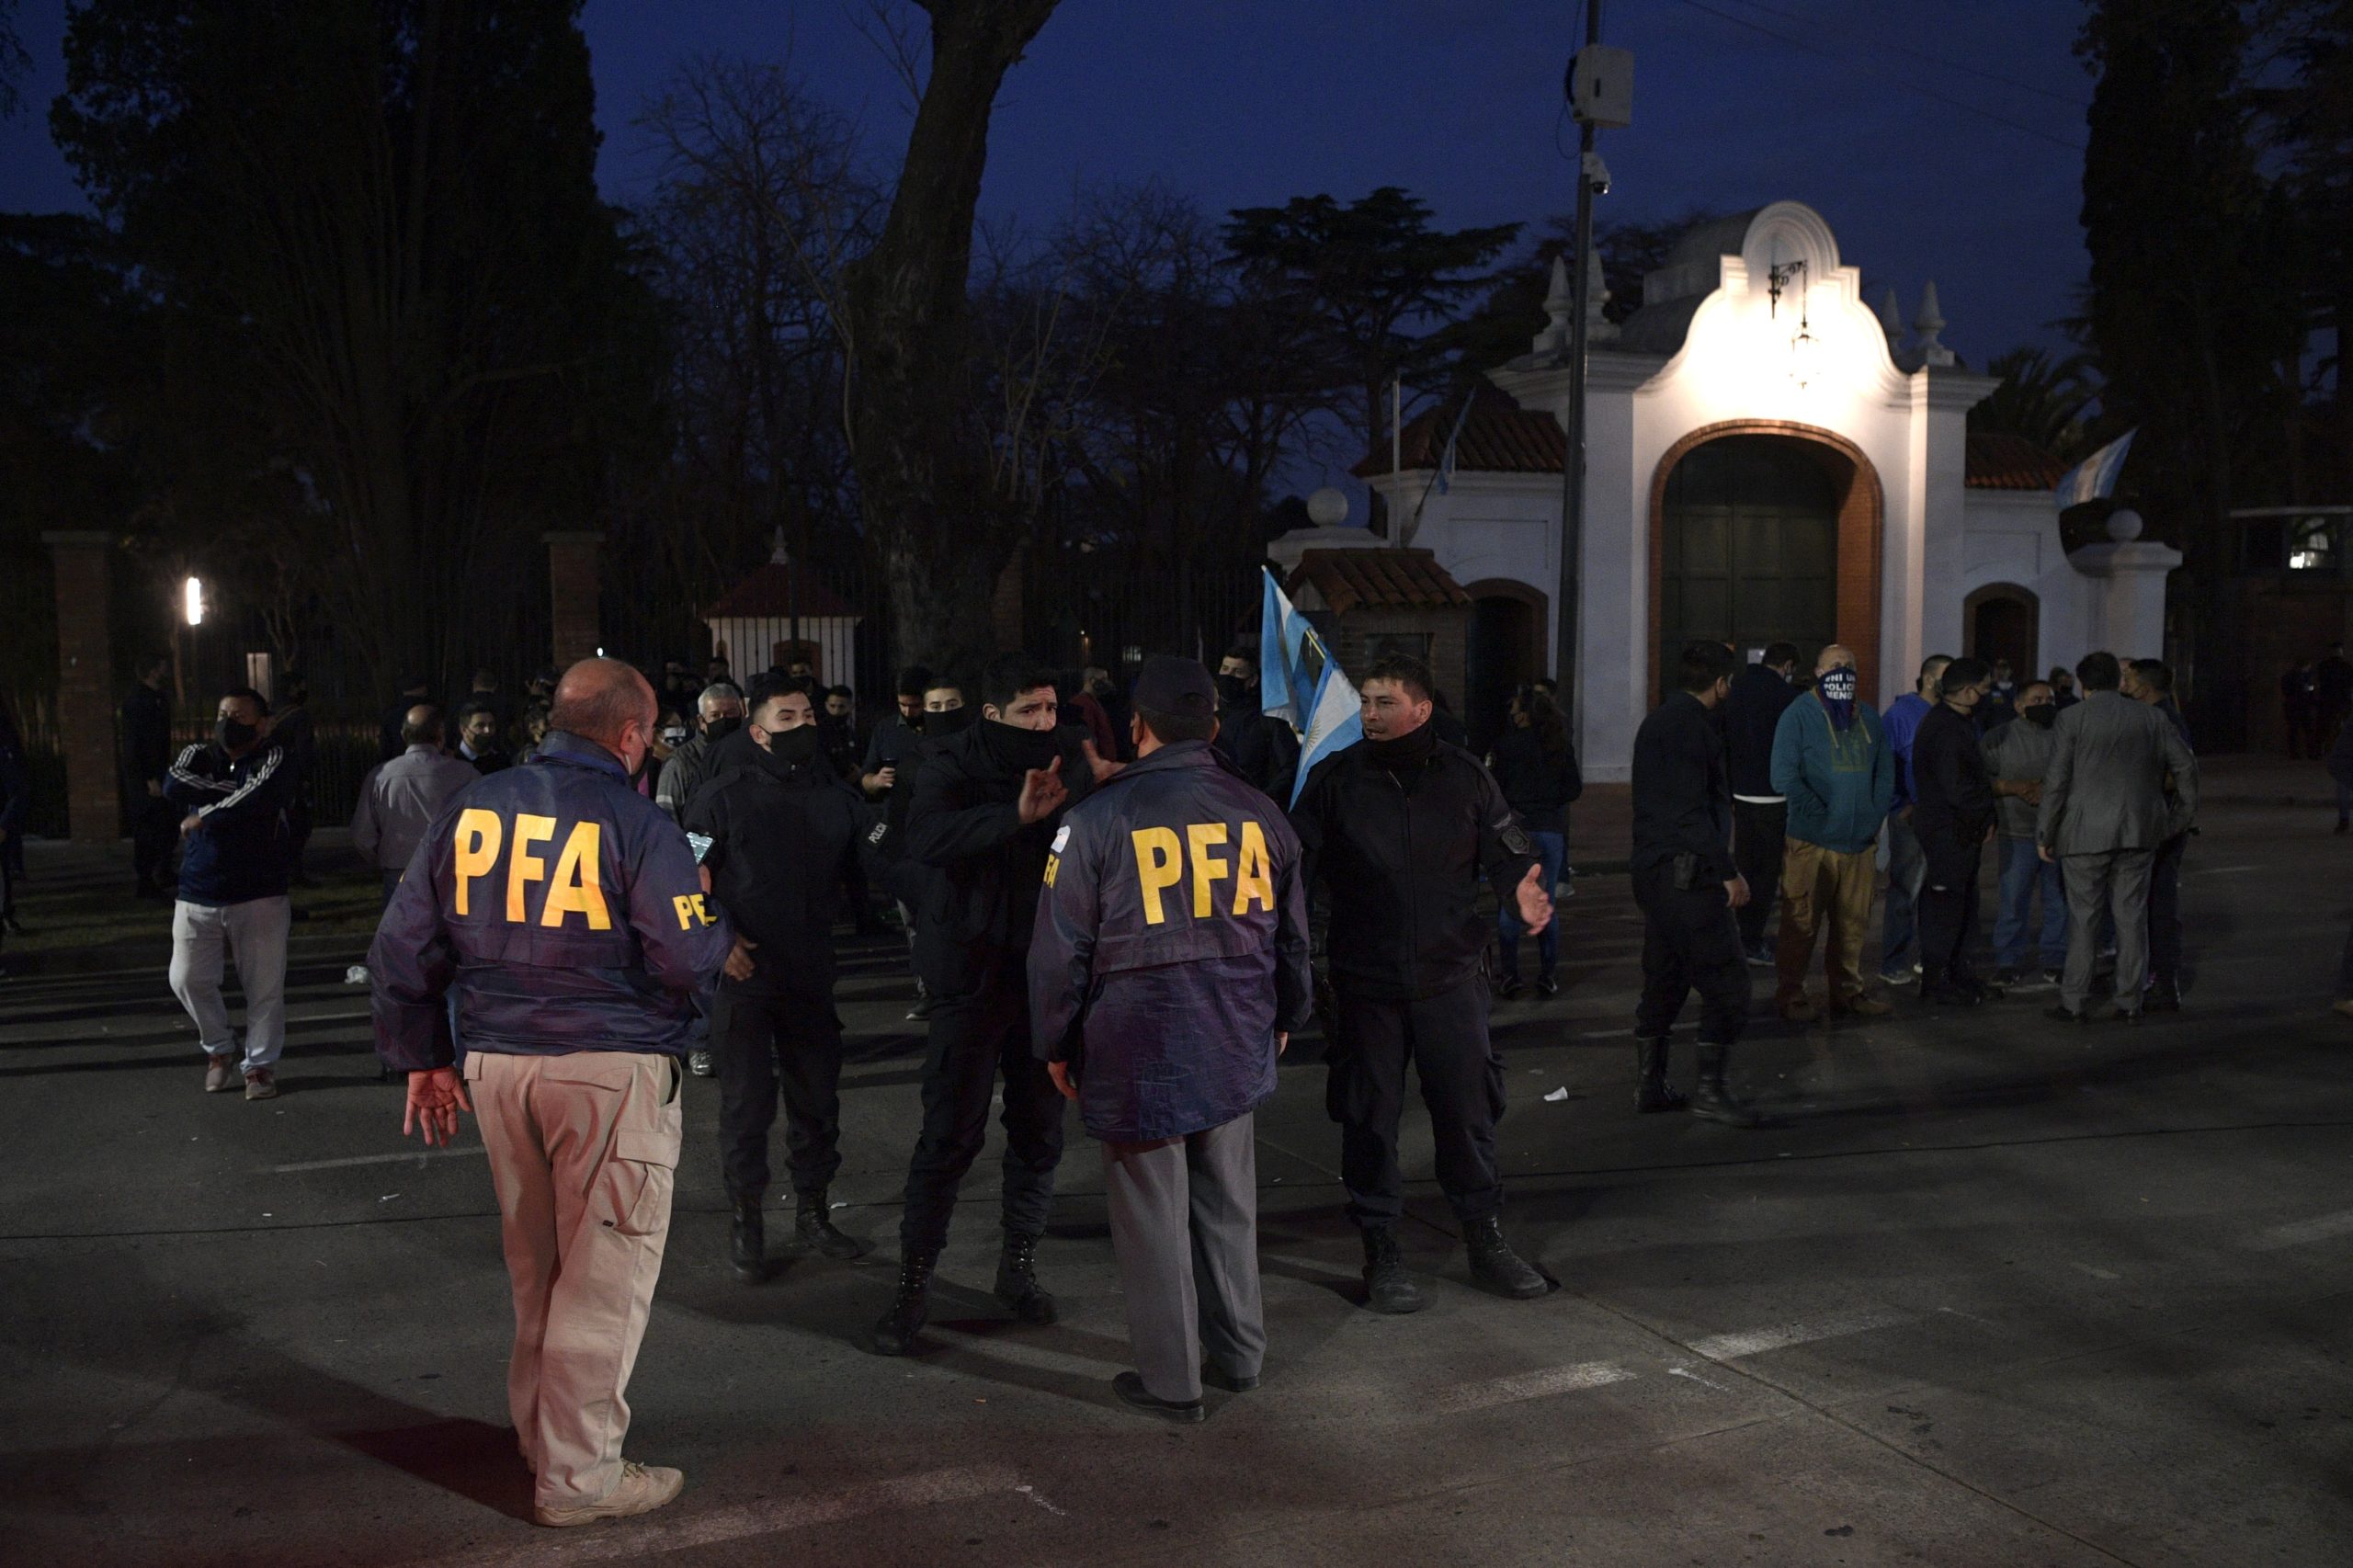 Members of the Buenos Aires province police, that attend a demonstration in demand of a rise in their wages and better working conditions, argue with Federal policemen (PFA) before leaving from the front of the Olivos presidential residence after the arrival of supporters of Argentina's President Alberto Fernandez in Buenos Aires outskirts, Argentina, on September 9, 2020, amid the new coronavirus pandemic. (Photo by JUAN MABROMATA/AFP via Getty Images)